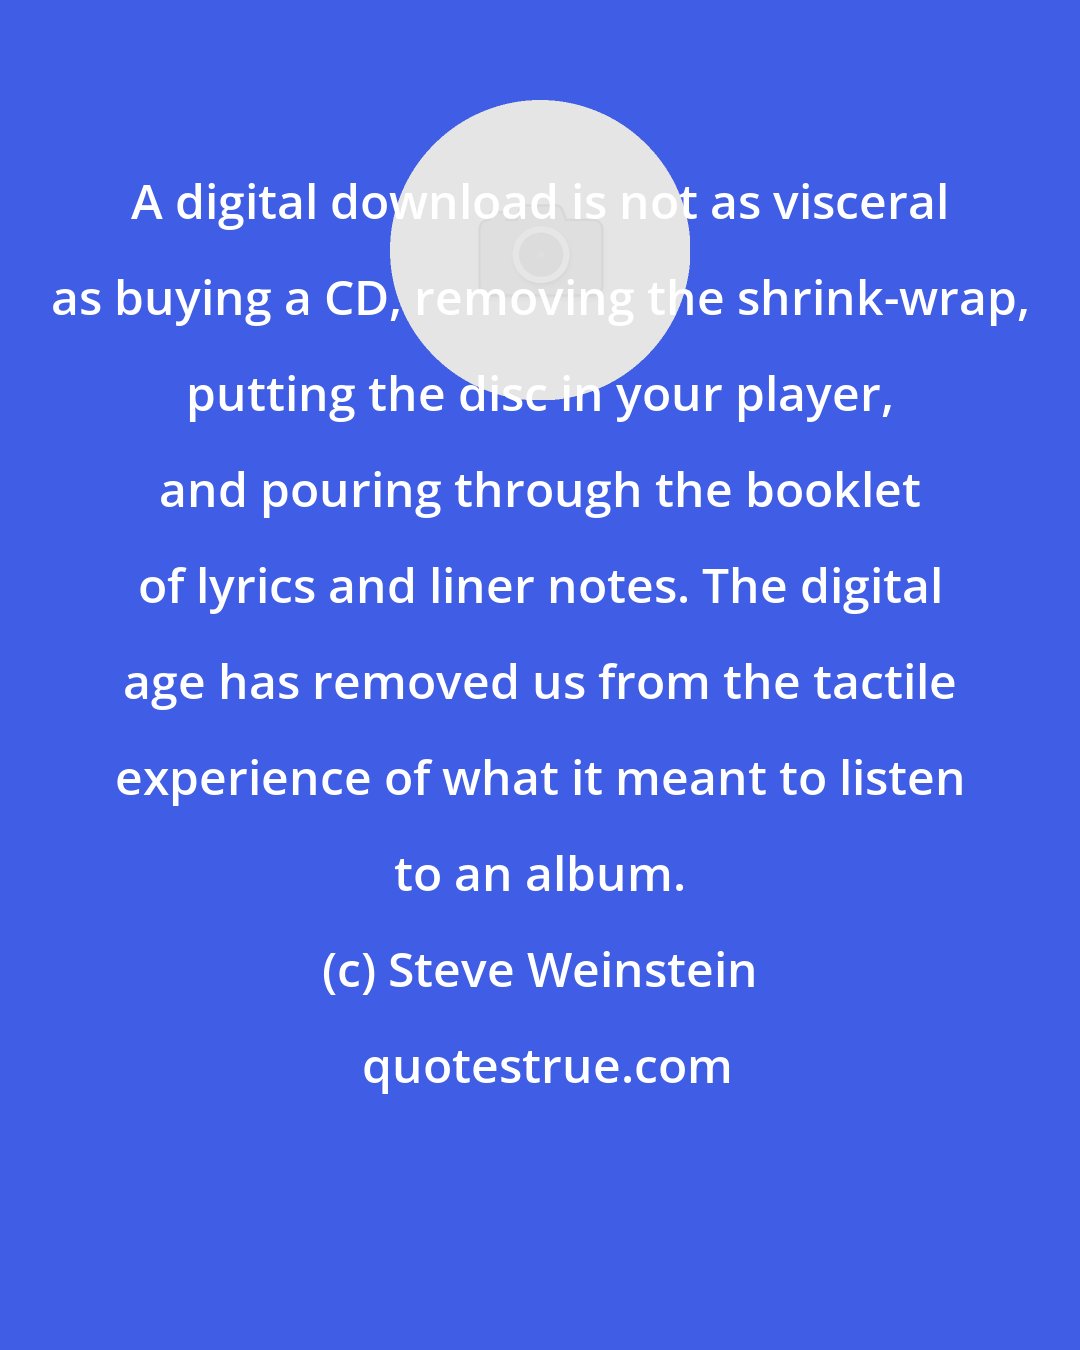 Steve Weinstein: A digital download is not as visceral as buying a CD, removing the shrink-wrap, putting the disc in your player, and pouring through the booklet of lyrics and liner notes. The digital age has removed us from the tactile experience of what it meant to listen to an album.